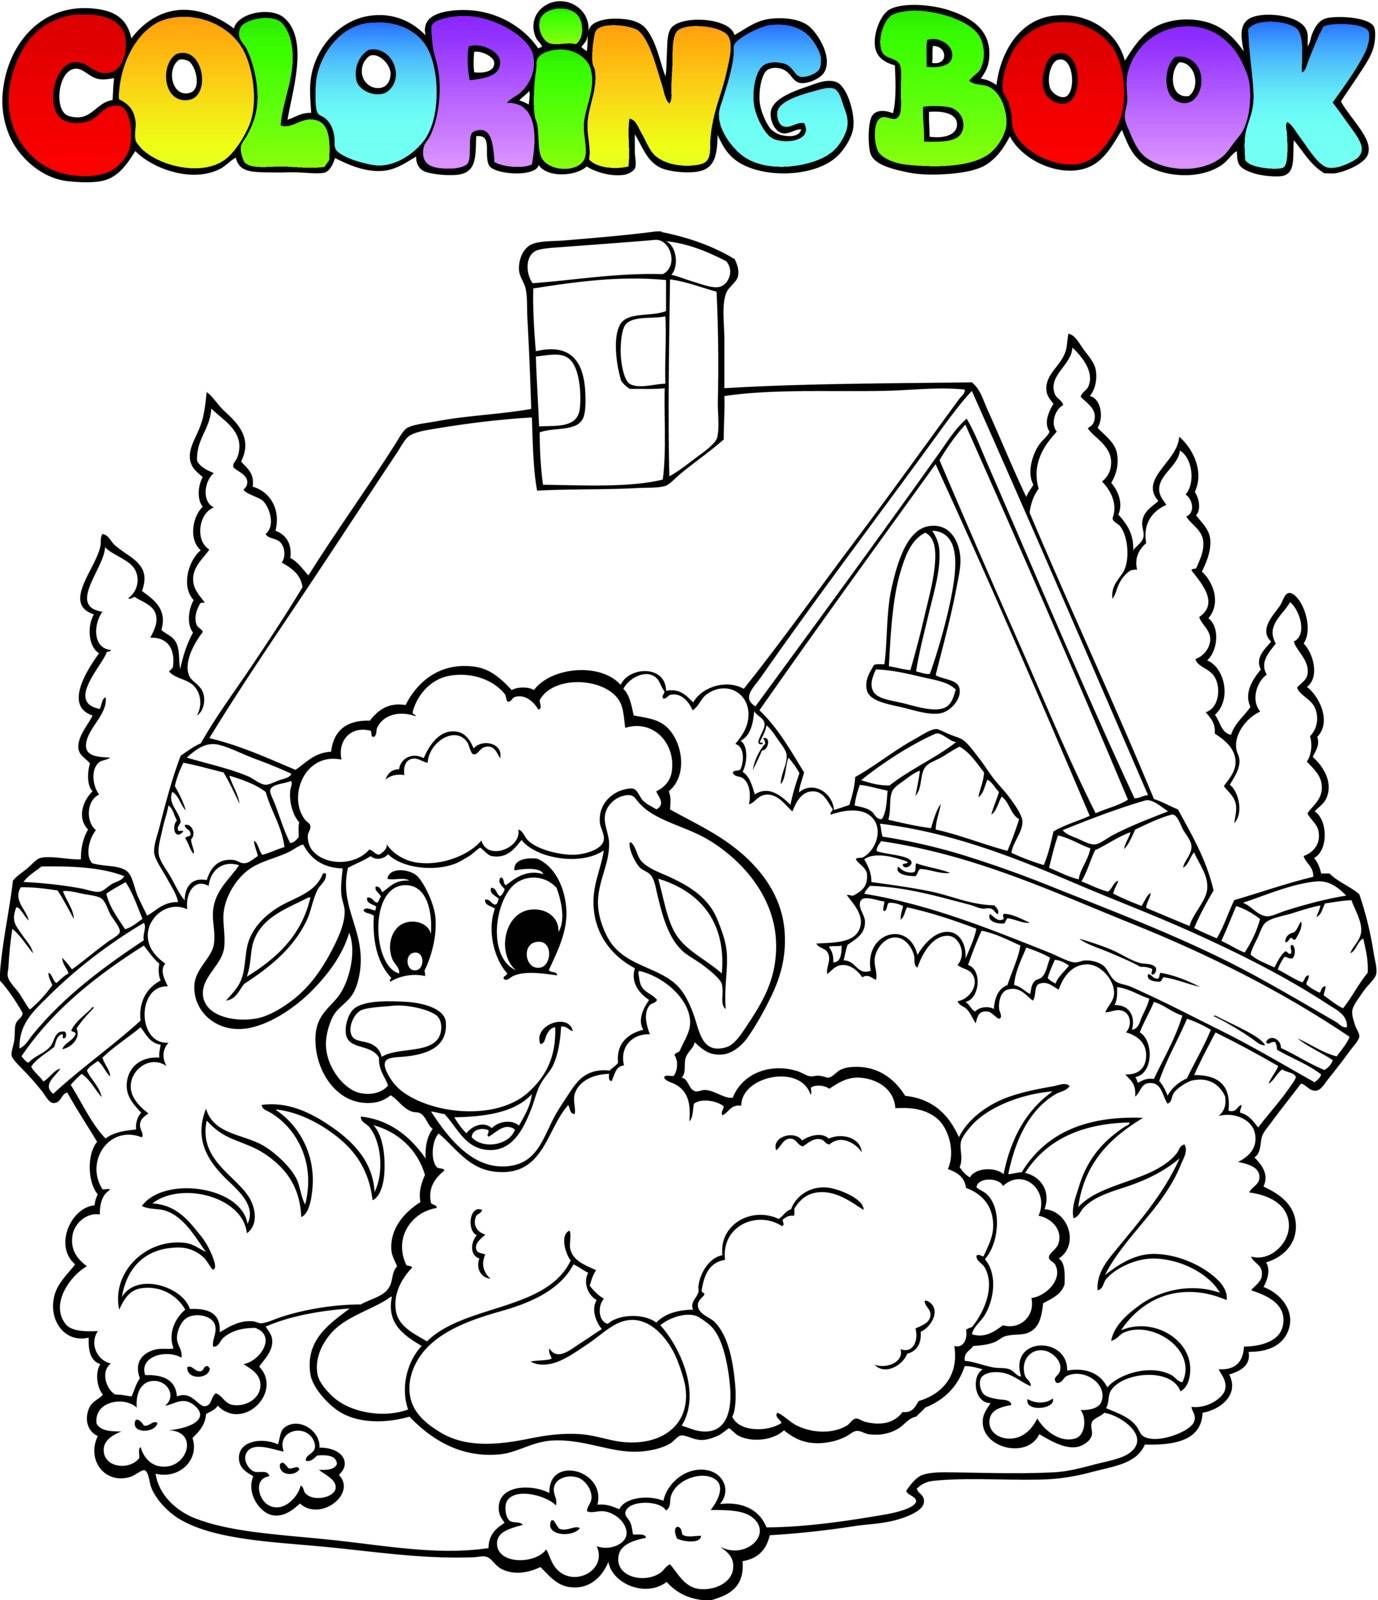 Coloring book spring theme 1 - vector illustration.